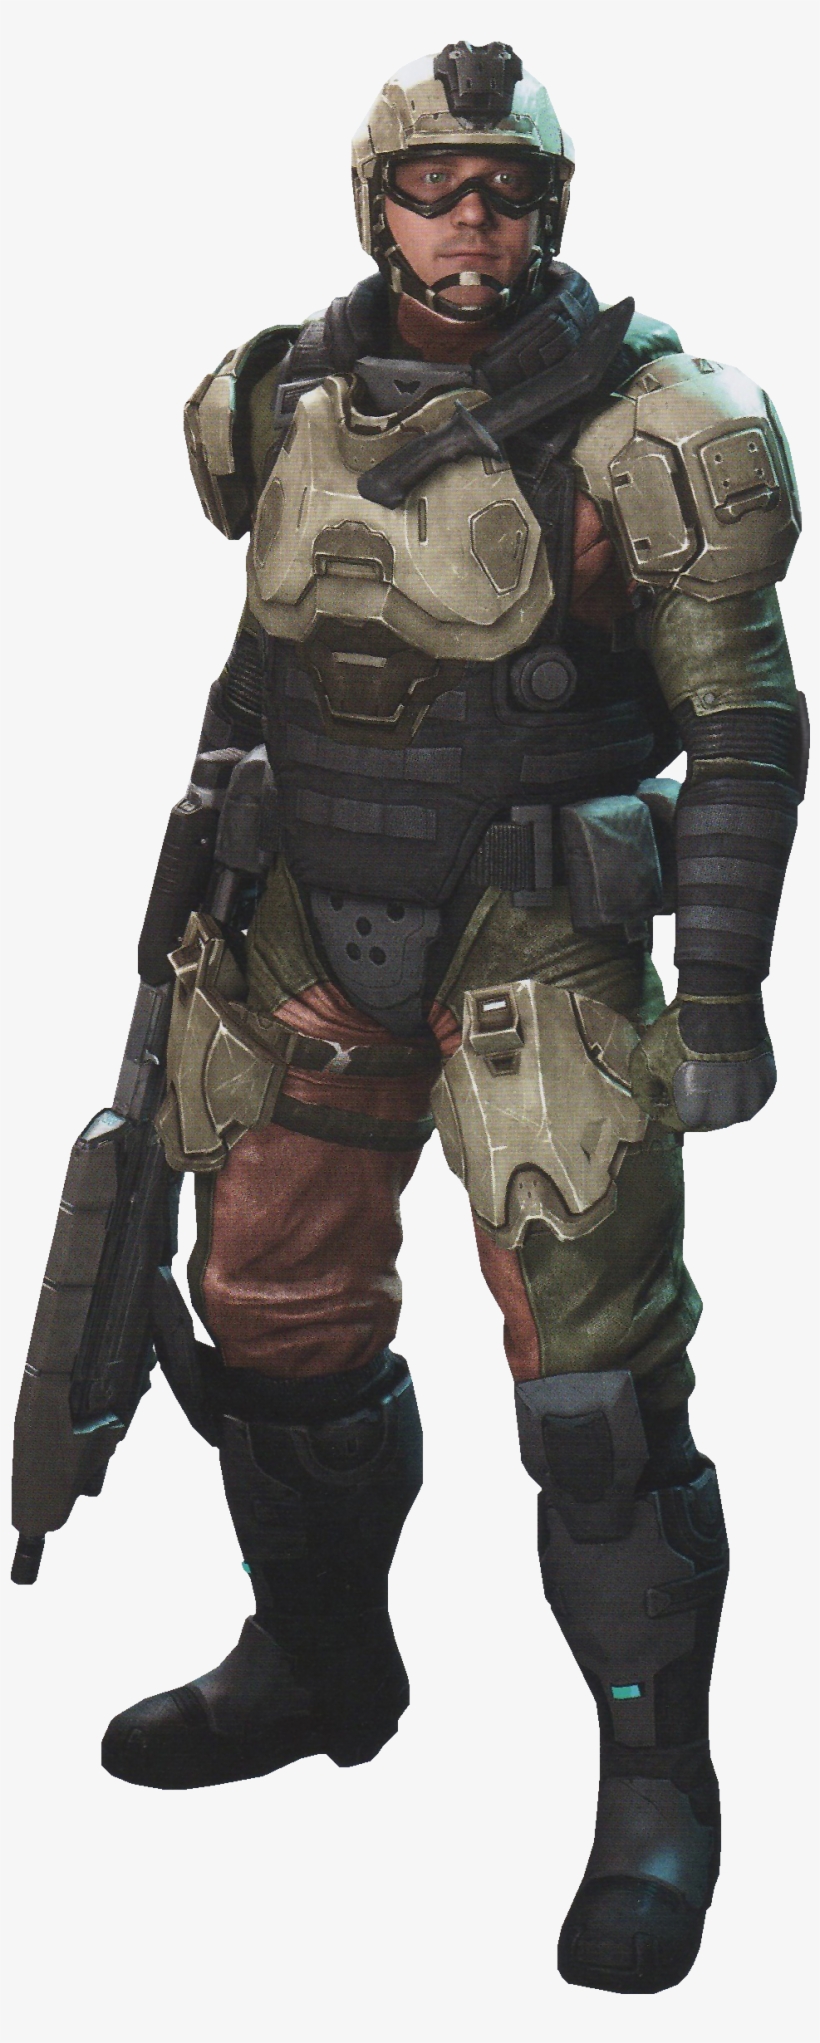 Its Also The Same Set As Infantery 4 Only Diffrent - Unsc Marine Halo 4, transparent png #9056780